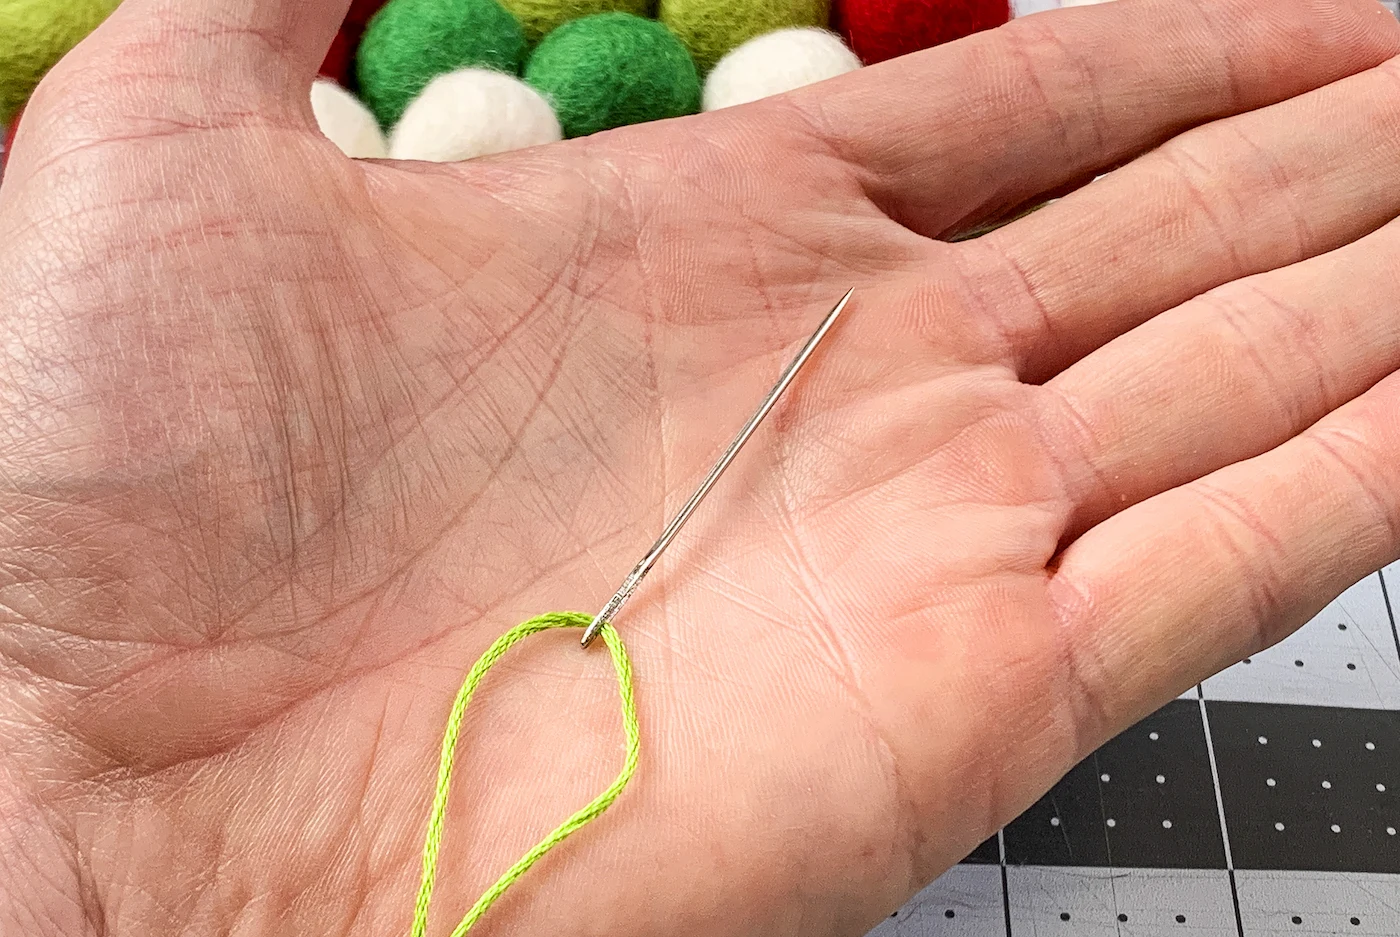 Hand holding a needle strung onto embroidery floss